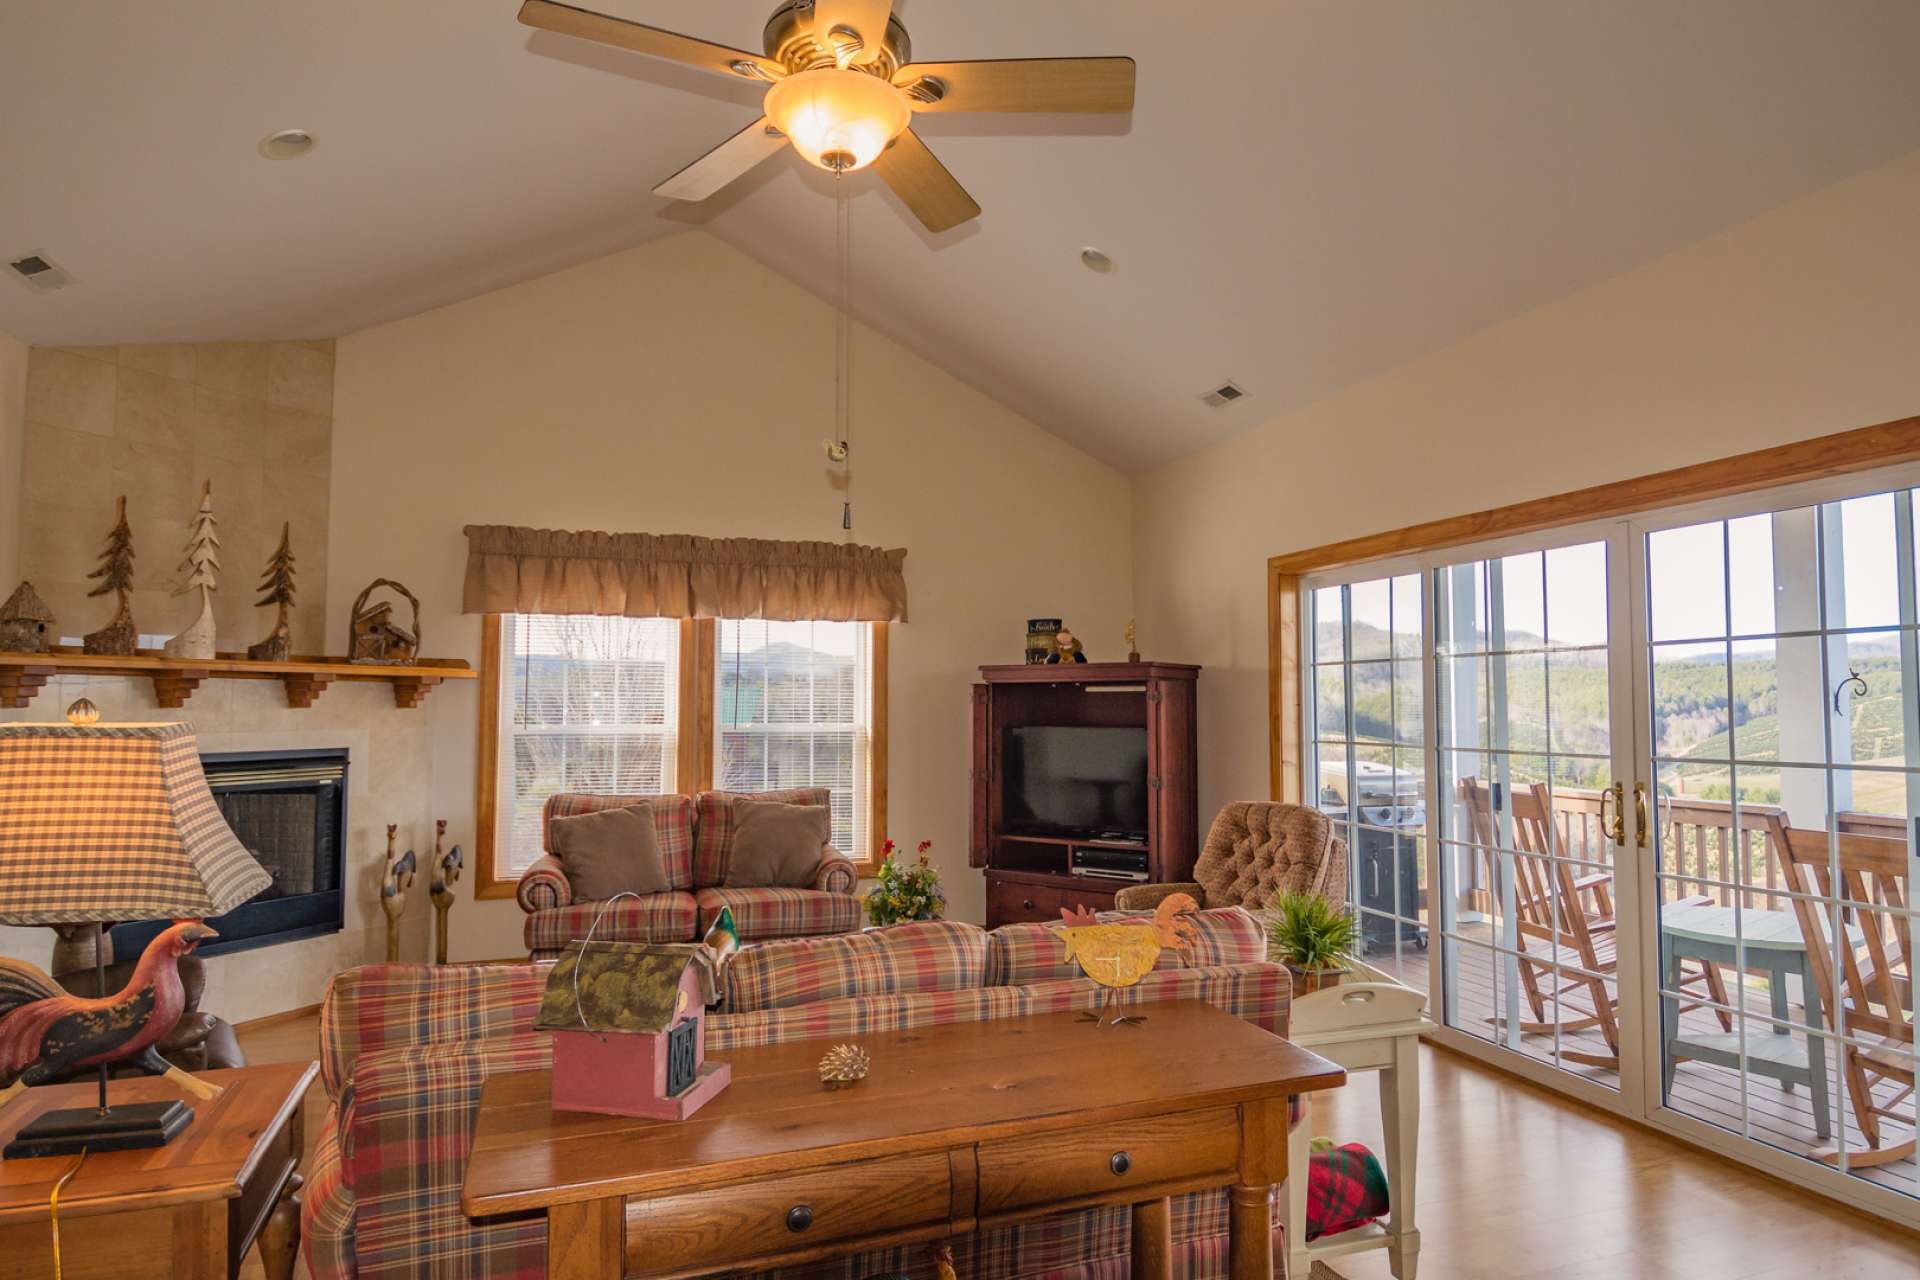 Double French Doors enable enjoyment of the views throughout all four seasons in the NC Mountains, and provide easy access to the back deck for outdoor grilling, dining, and entertaining.